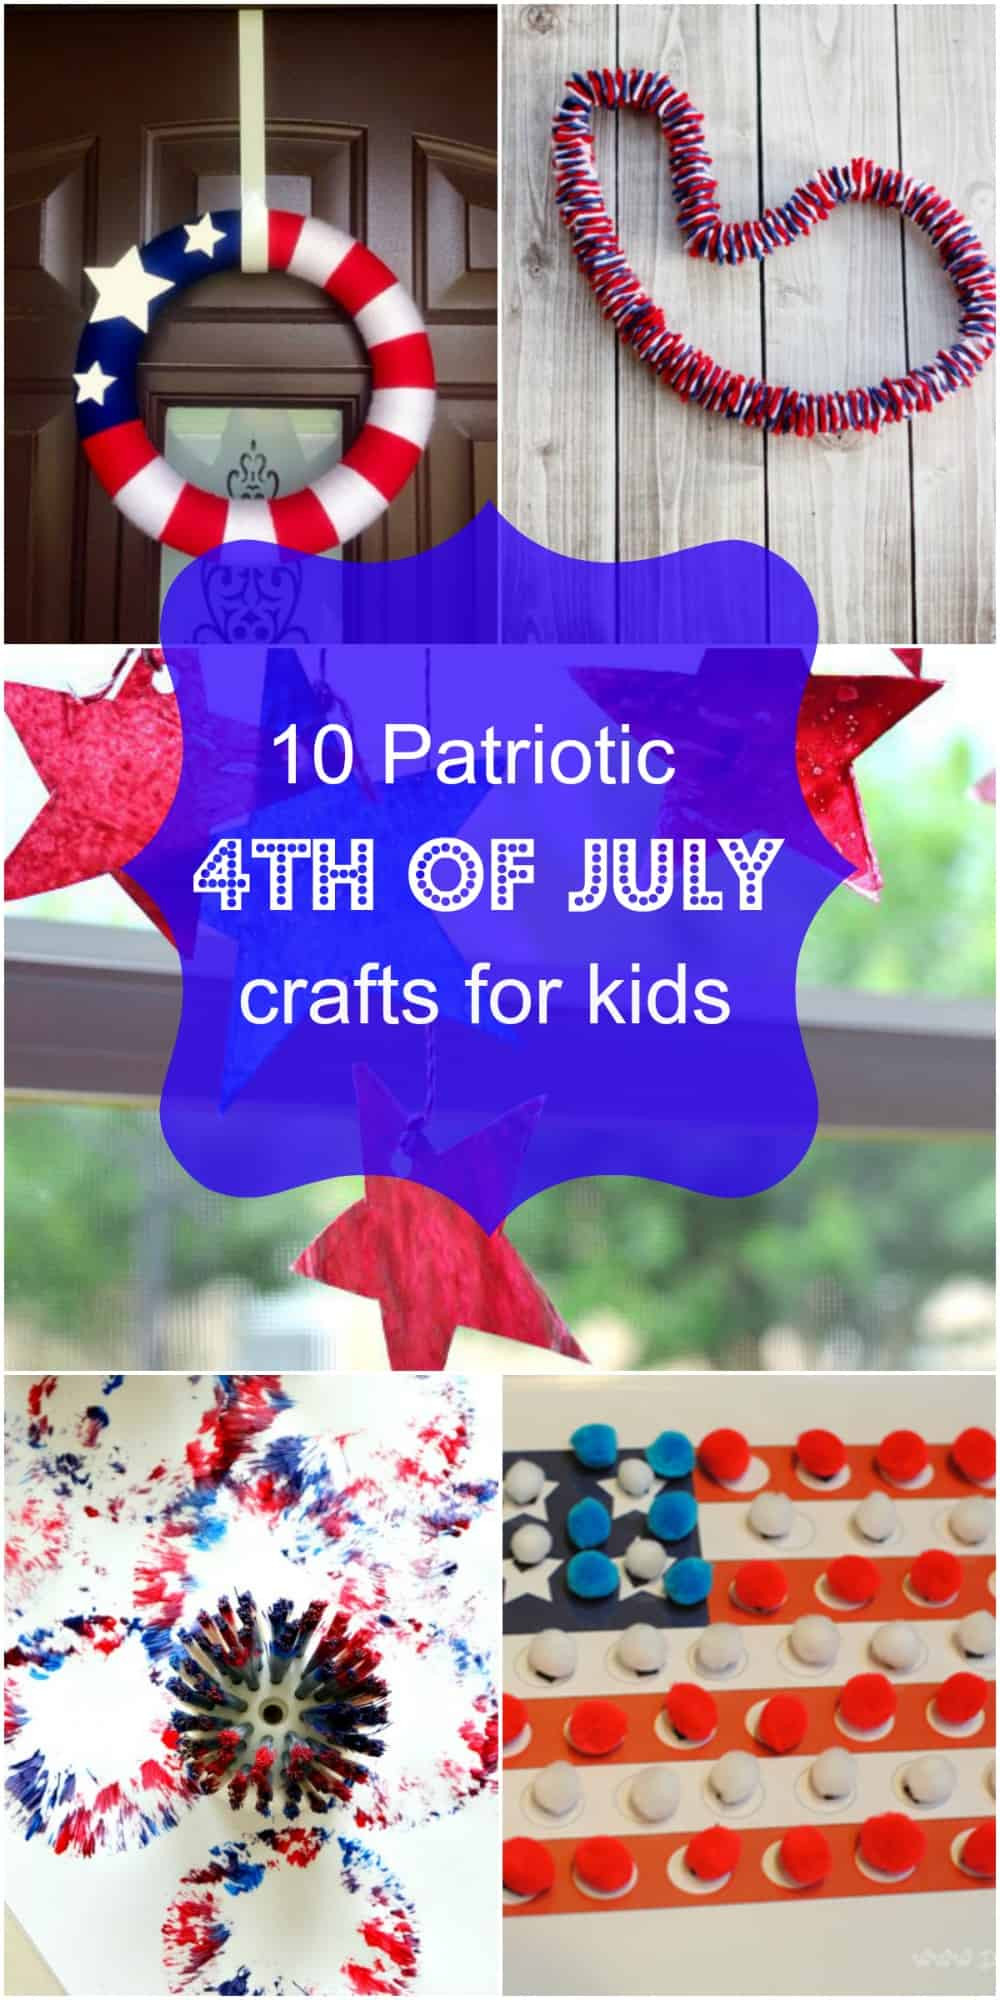 4Th Of July Crafts For Kids
 10 Patriotic 4th of July Crafts For Kids To Make